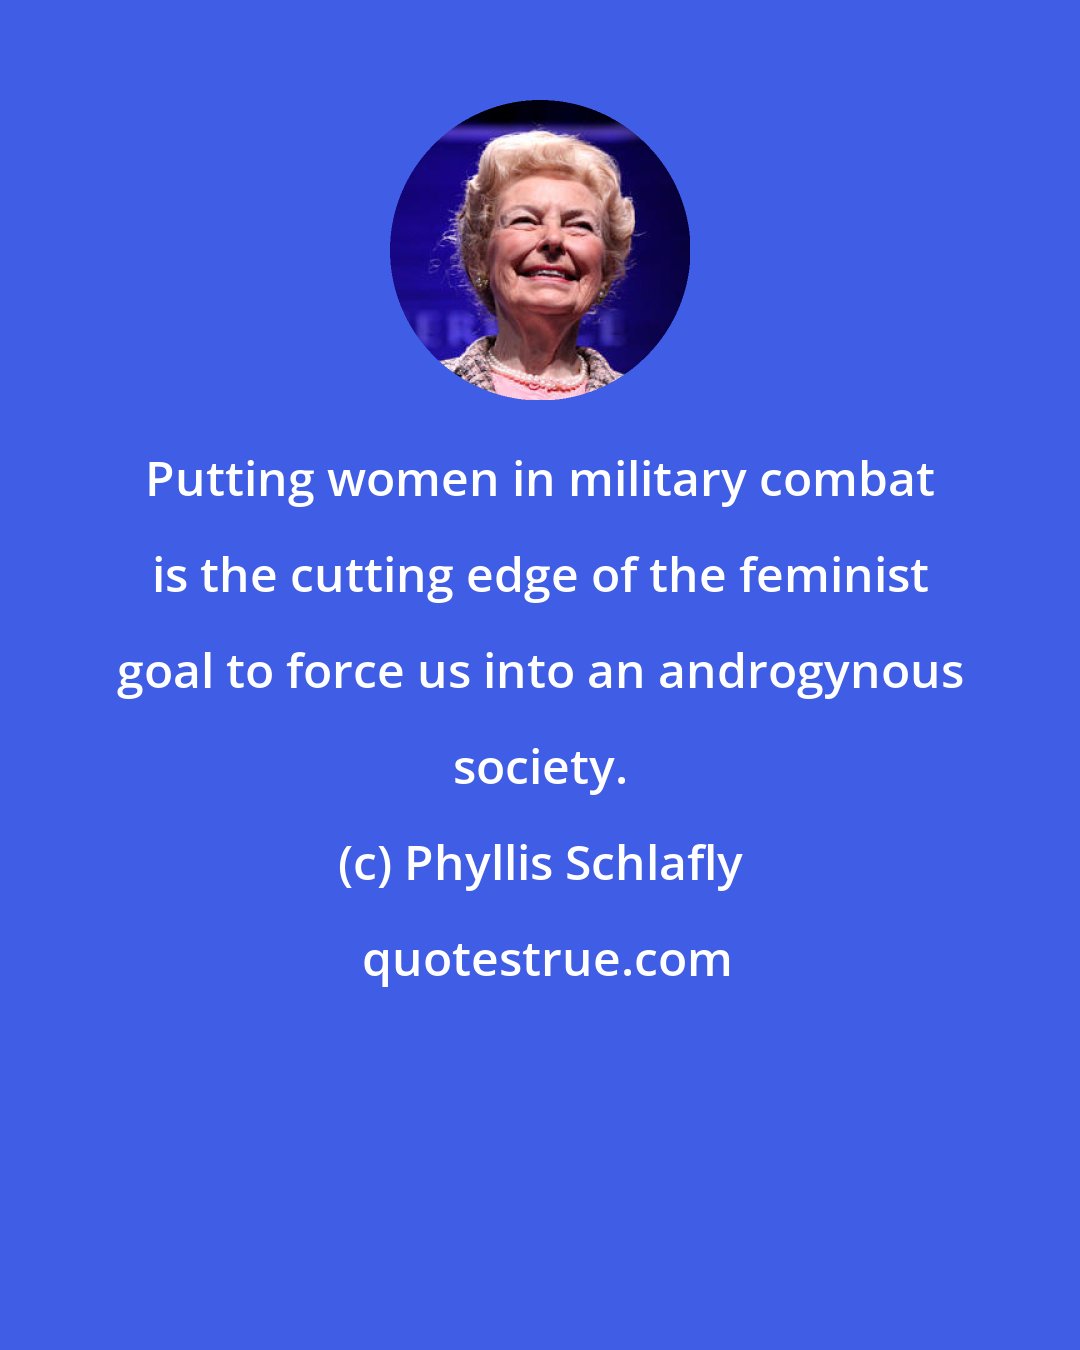 Phyllis Schlafly: Putting women in military combat is the cutting edge of the feminist goal to force us into an androgynous society.